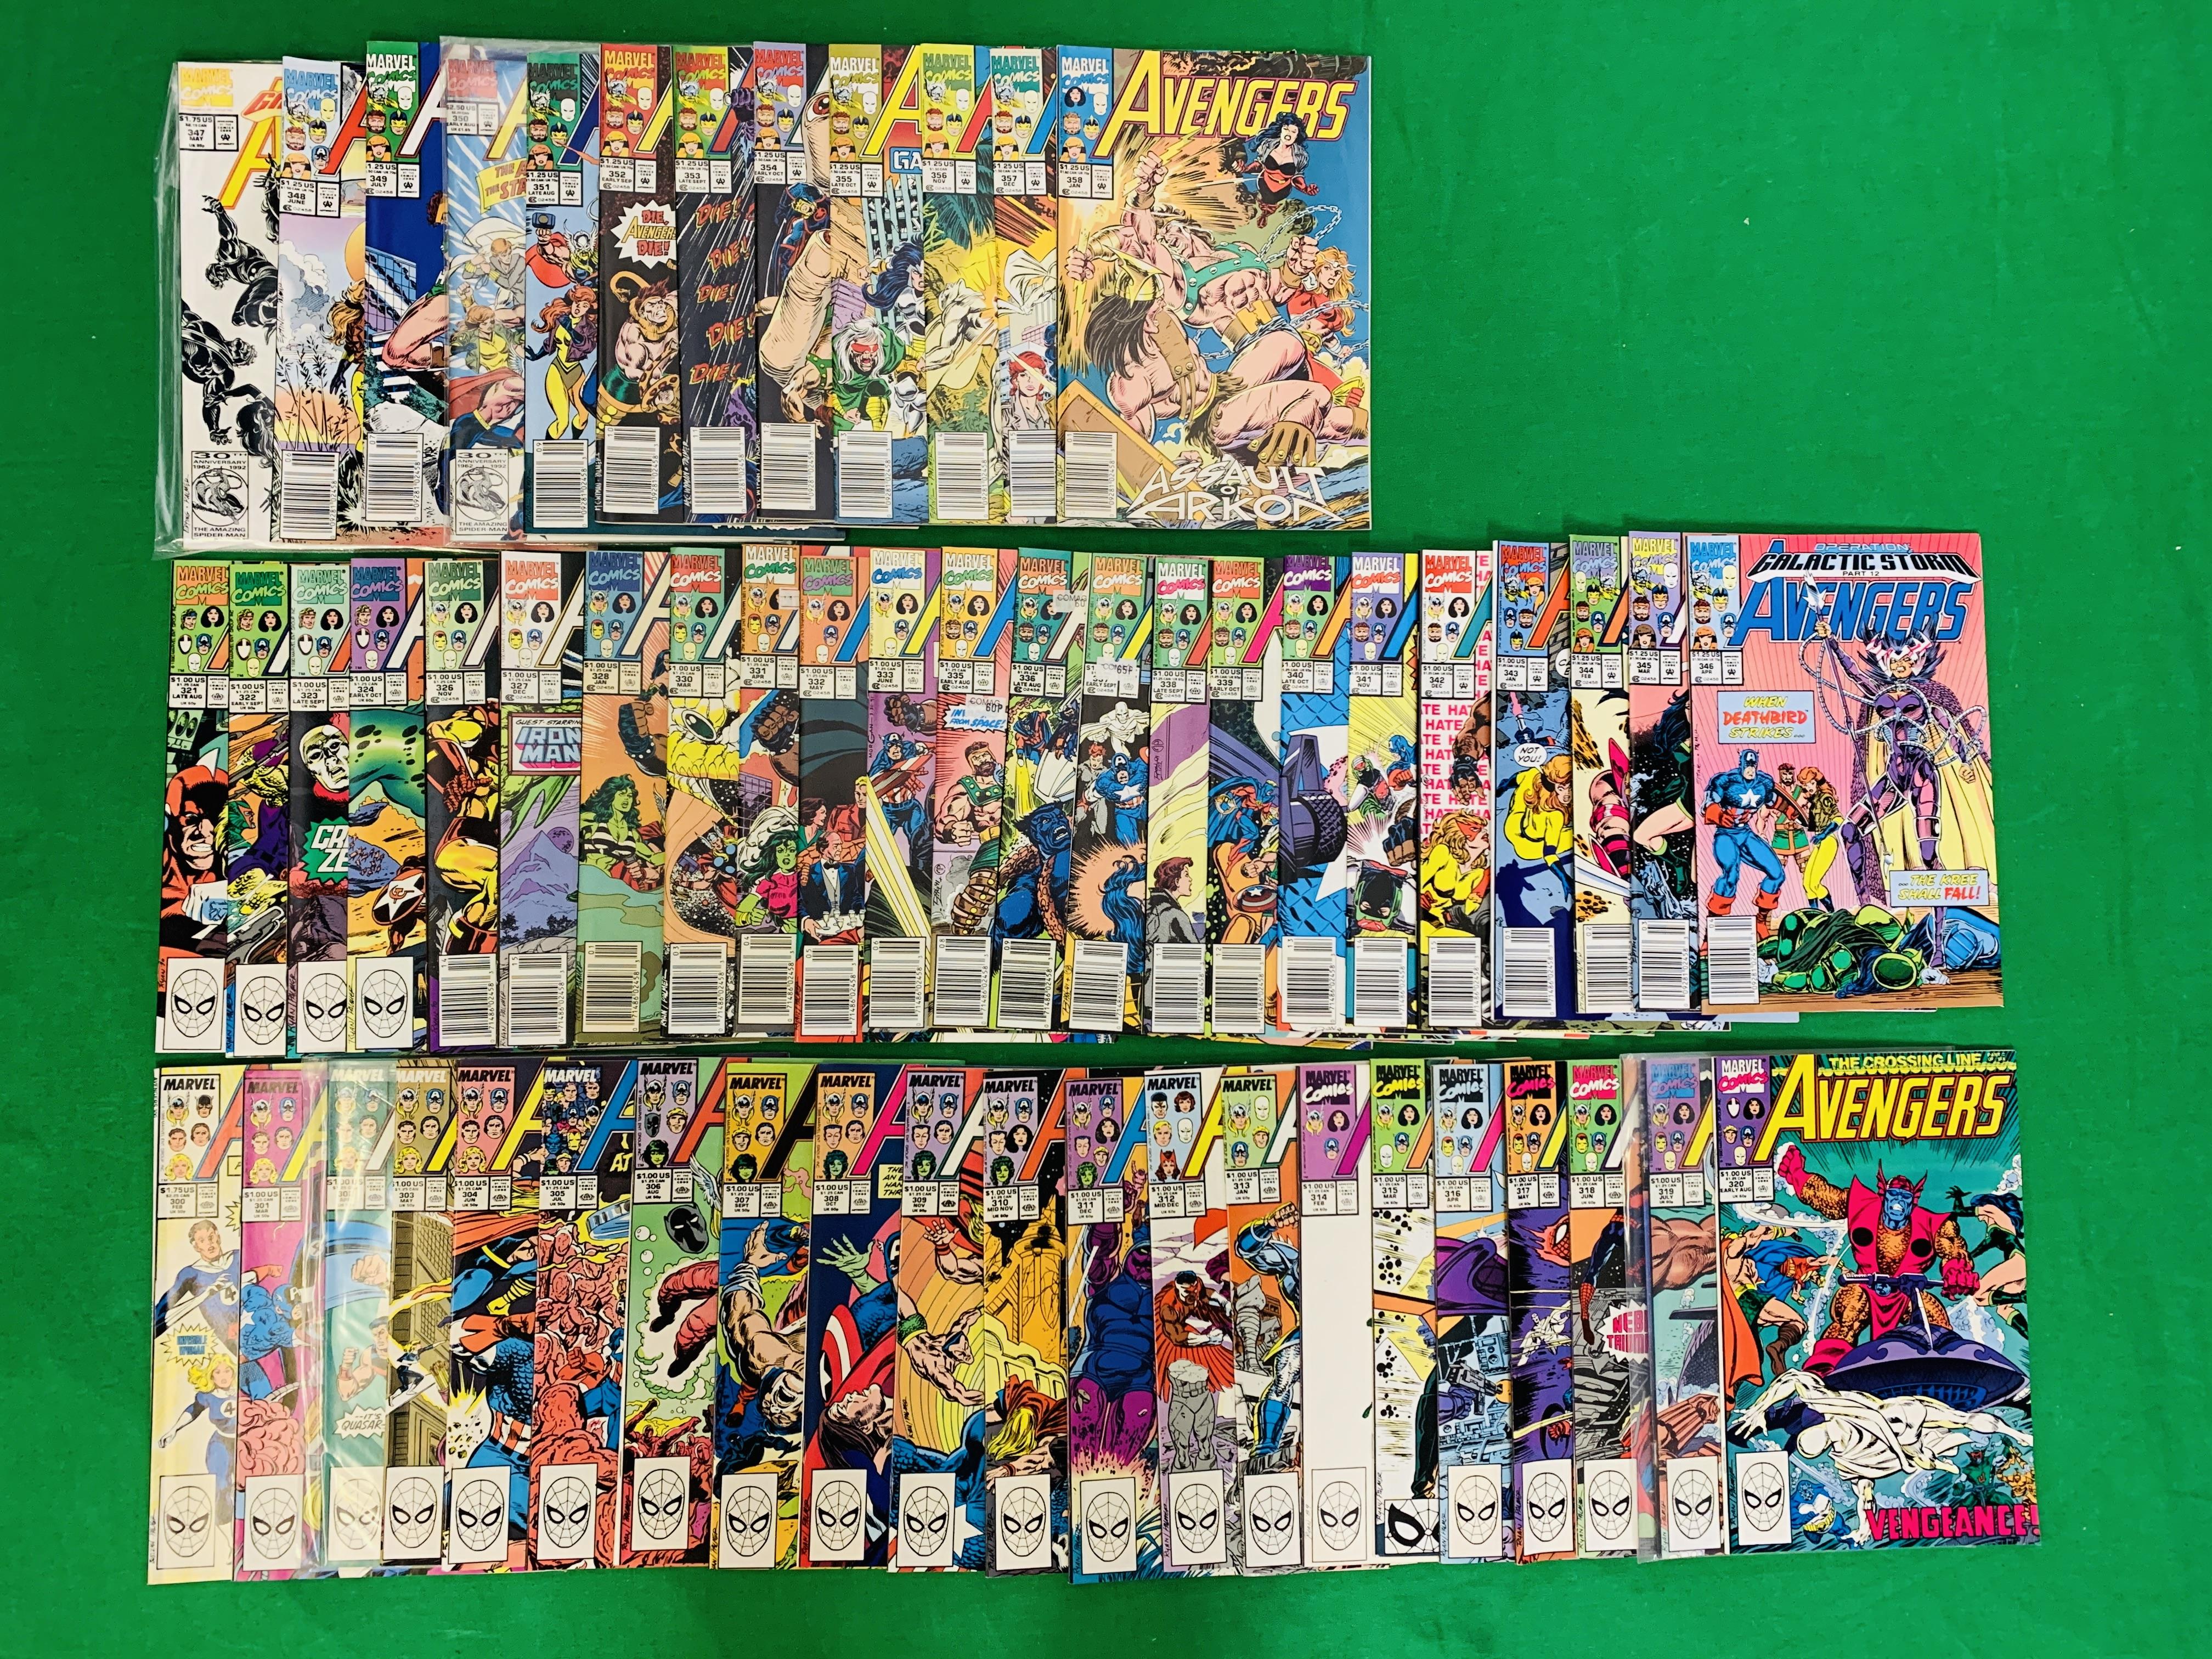 MARVEL COMICS THE AVENGERS NO. 300 - 402, MISSING ISSUES 325, 329 AND 334.